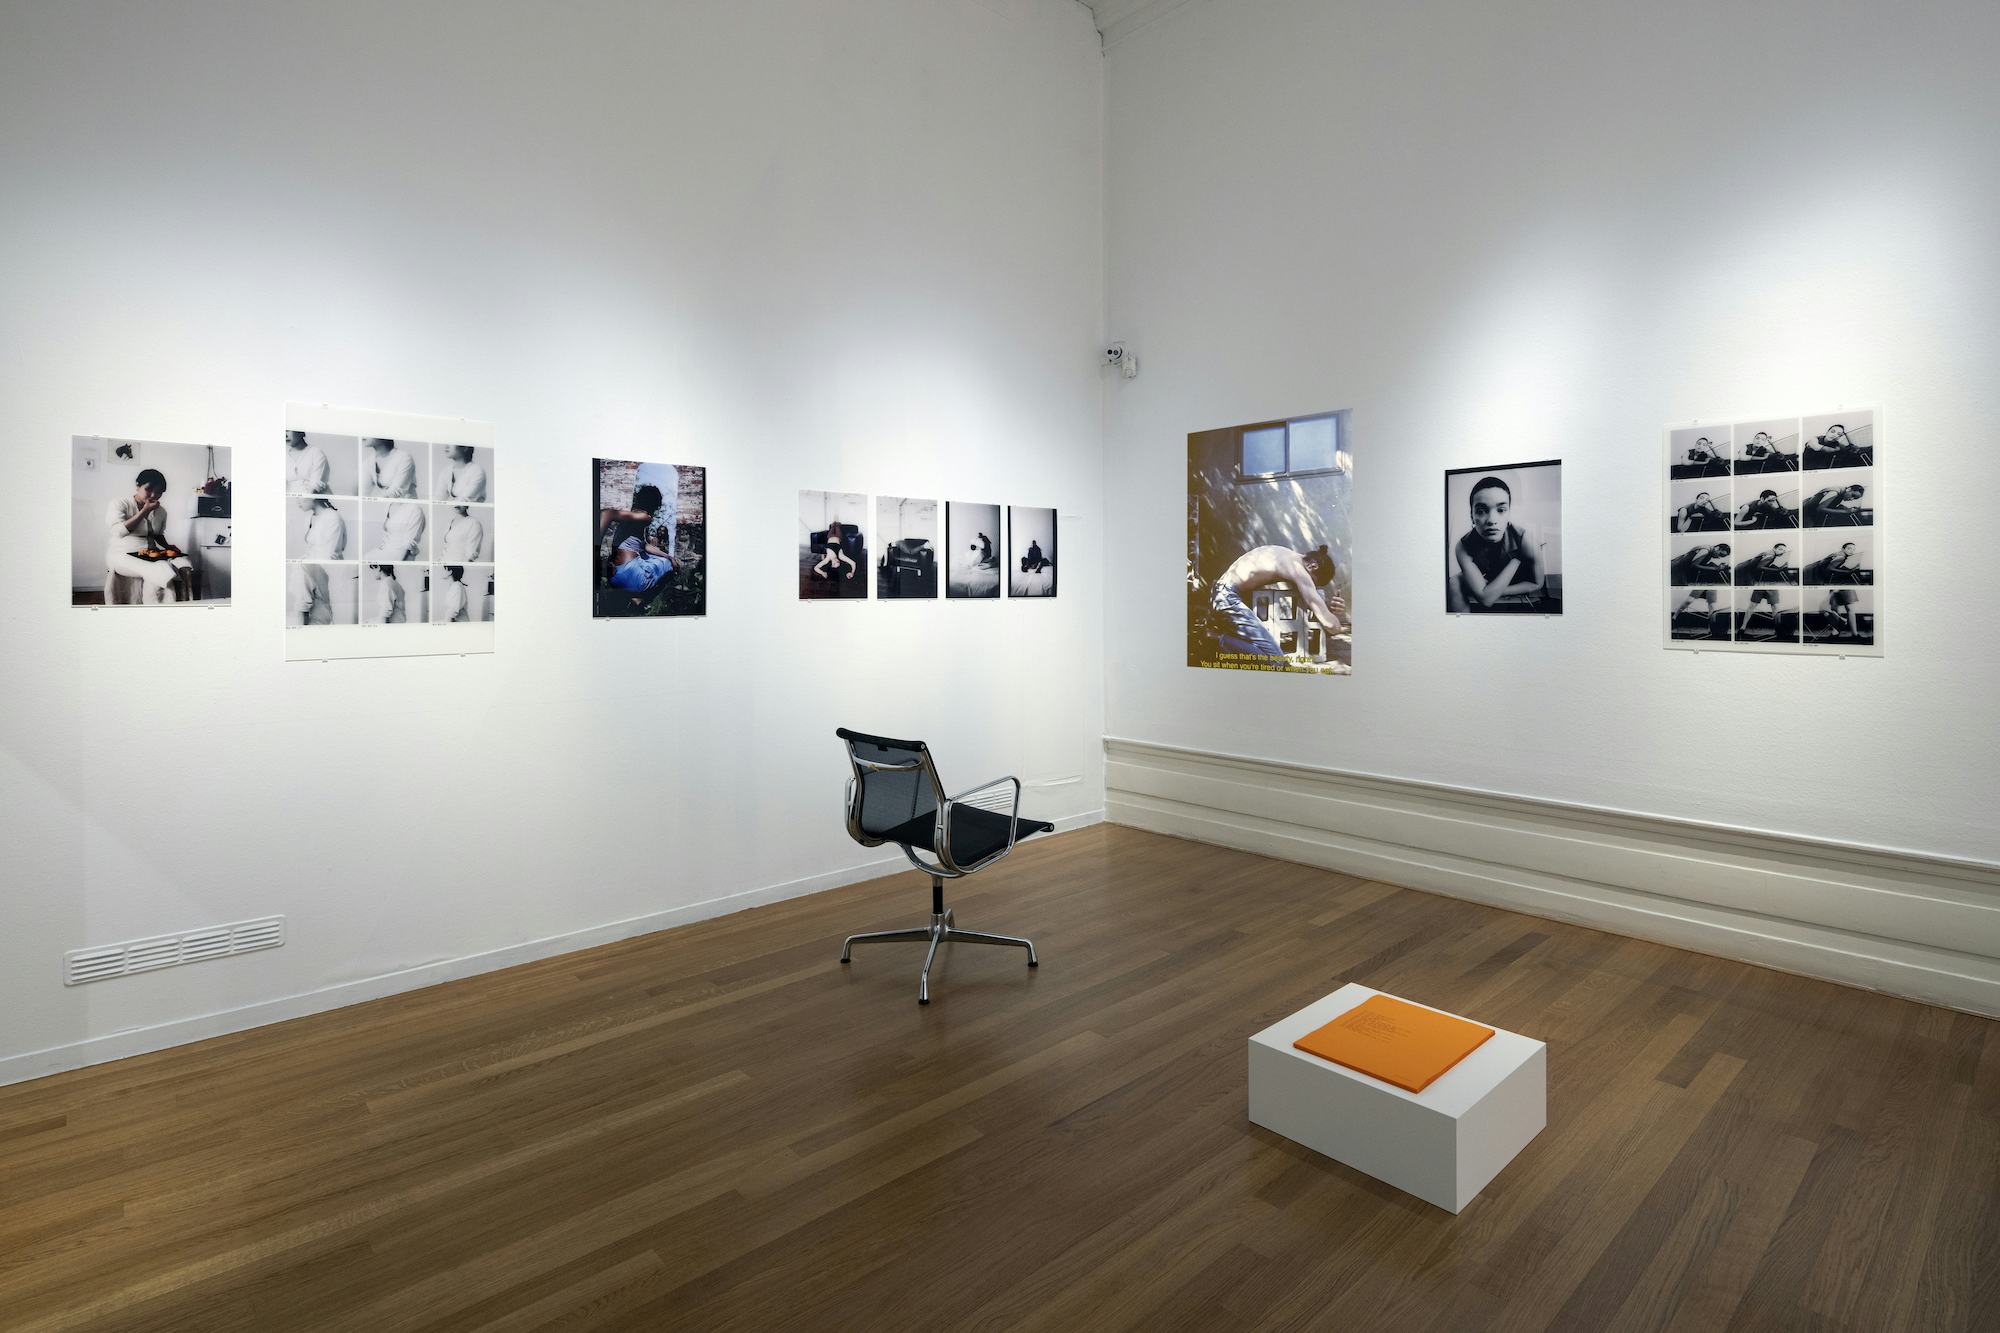 Installation photo of The Act of Sitting by Ritsch Sisters at Foam © Foam. Photo: Christian van der Kooy